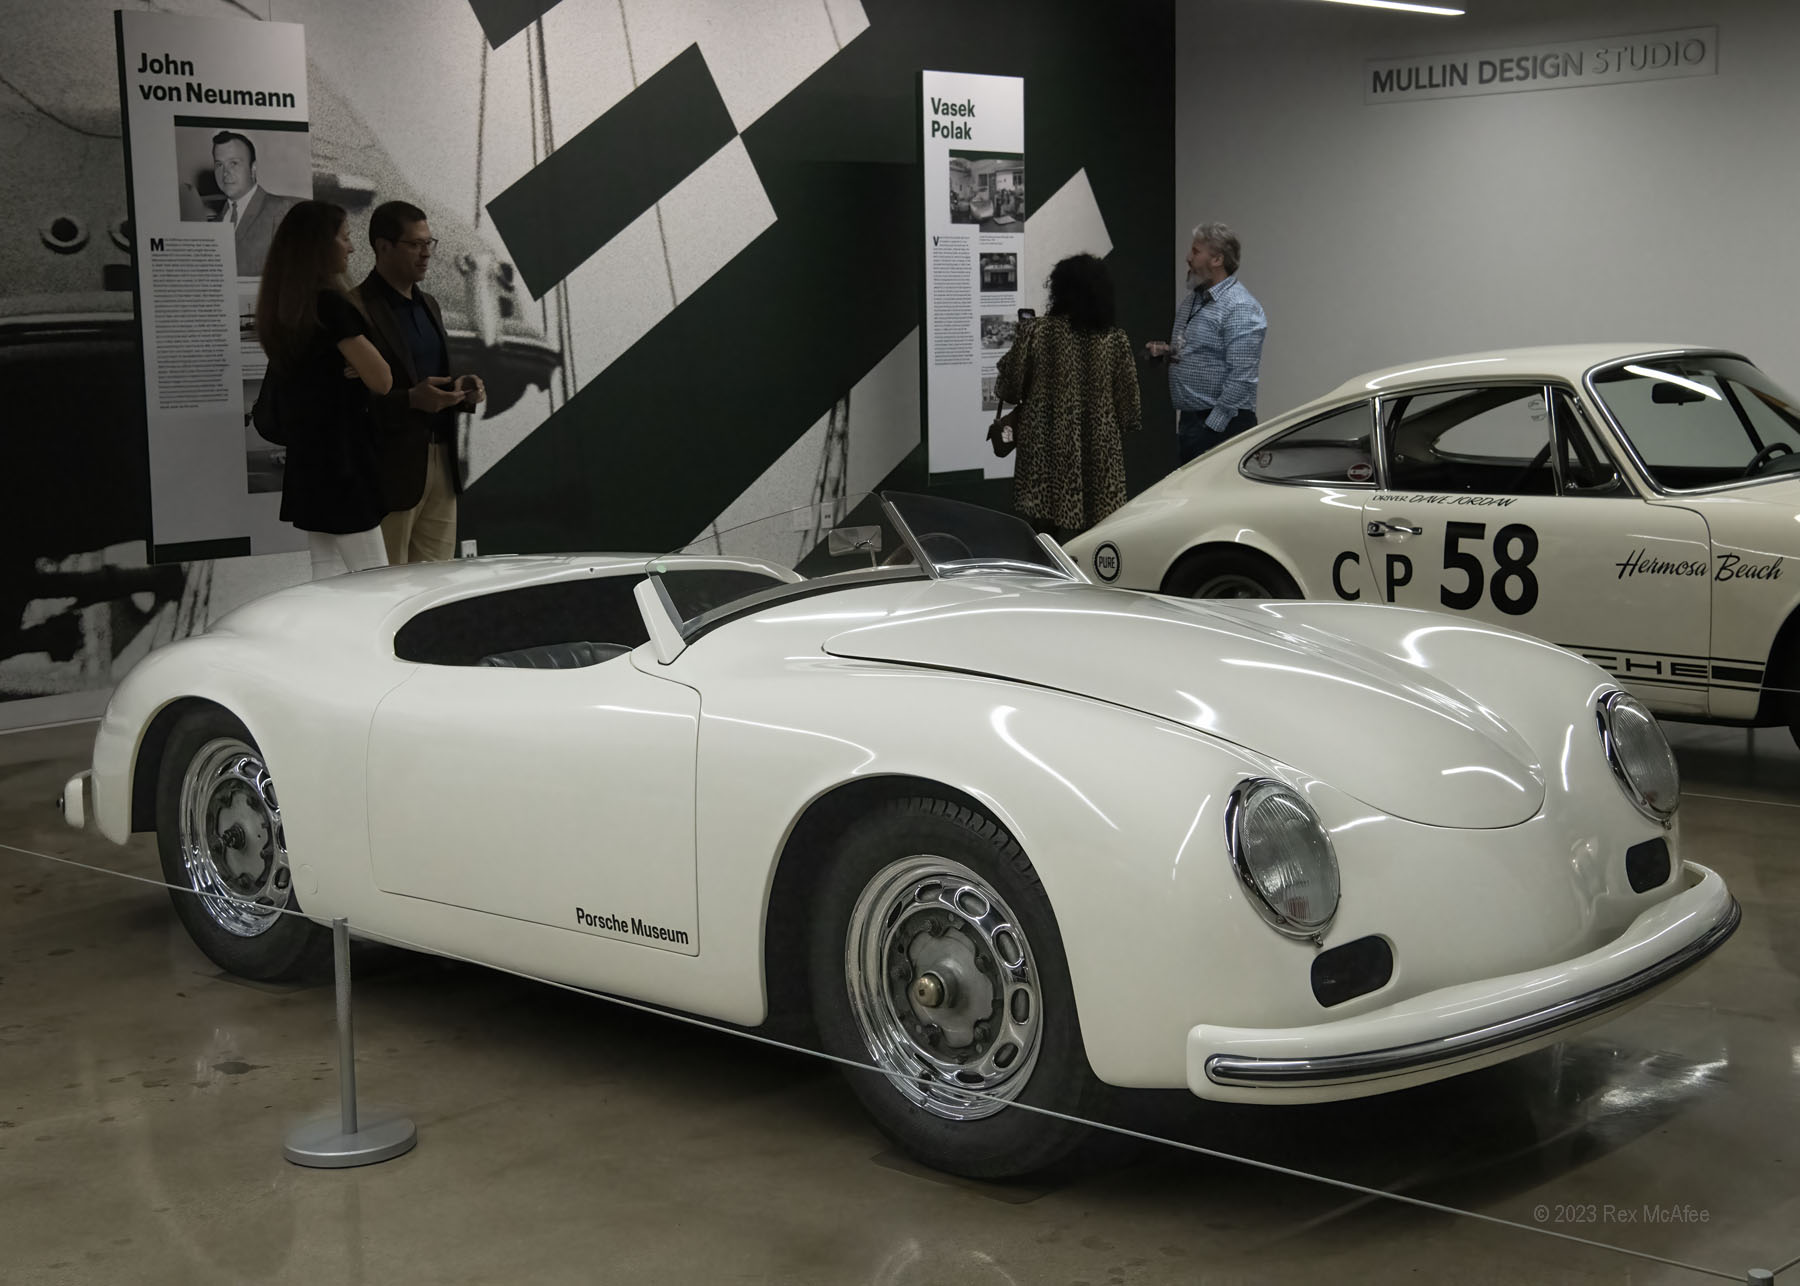 The America Roadster was Porsche’s response to Max Hoffman and John von Neumann’s request for a 356 race car. Heuer-Gläser built sixteen cars, but Drauz Karosseriewerke built this final one. The car weighed just 1,334 pounds and had a successful SCCA career driven by Jack McAfee and John von Neumann. Photo © 2023 Rex McAfee RexMcAfee@gmail.com